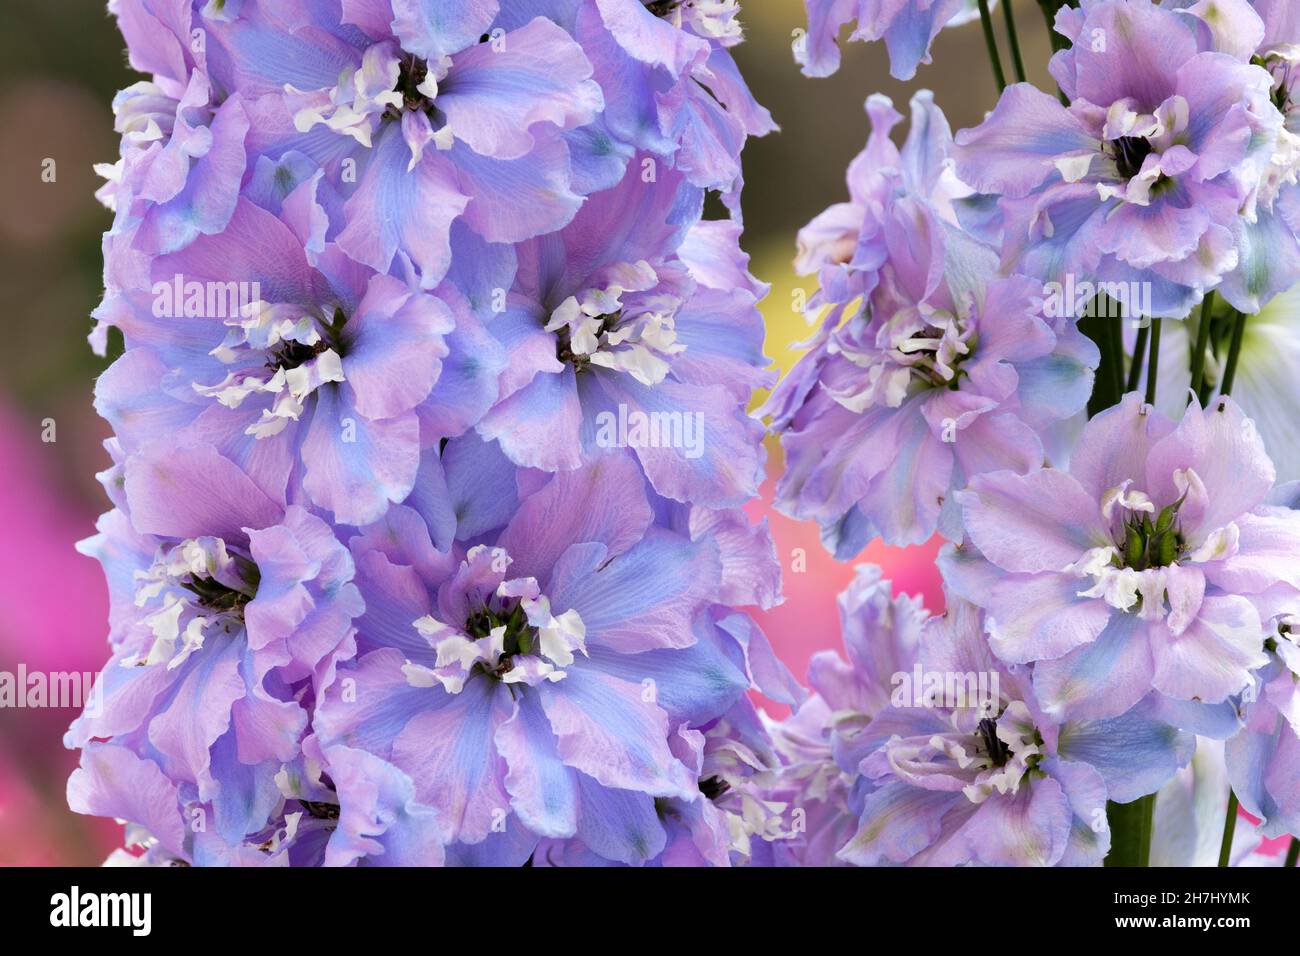 Delphinium 'Spindrift'. Candle Larkspur, Candle Larkspur 'Spindrift', Candle Delphinium 'Spindrift'. Semi-double pale lilac flowers Stock Photo